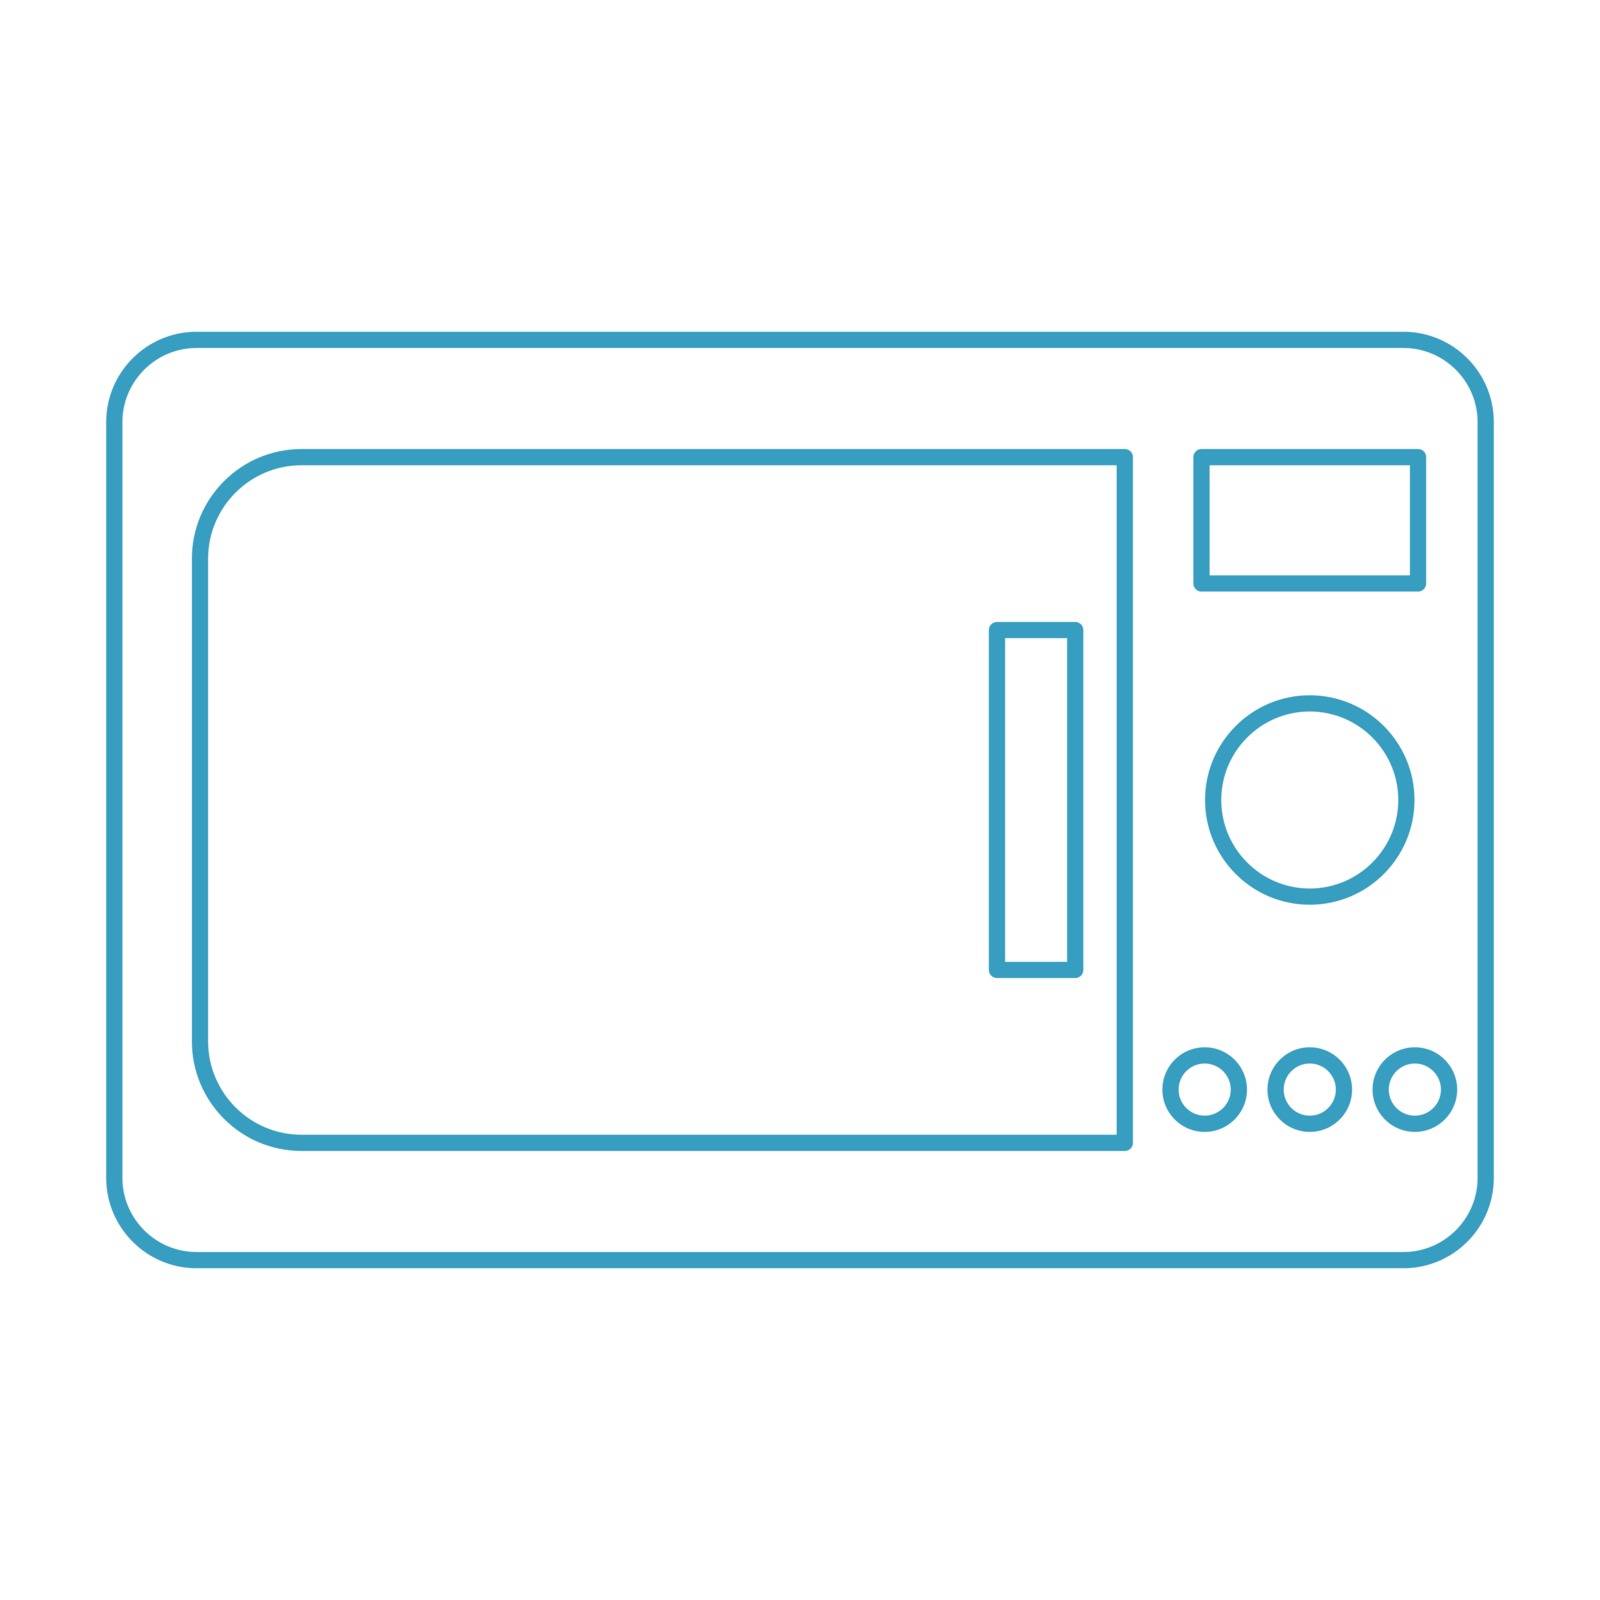 Thin line microwave icon by ang_bay